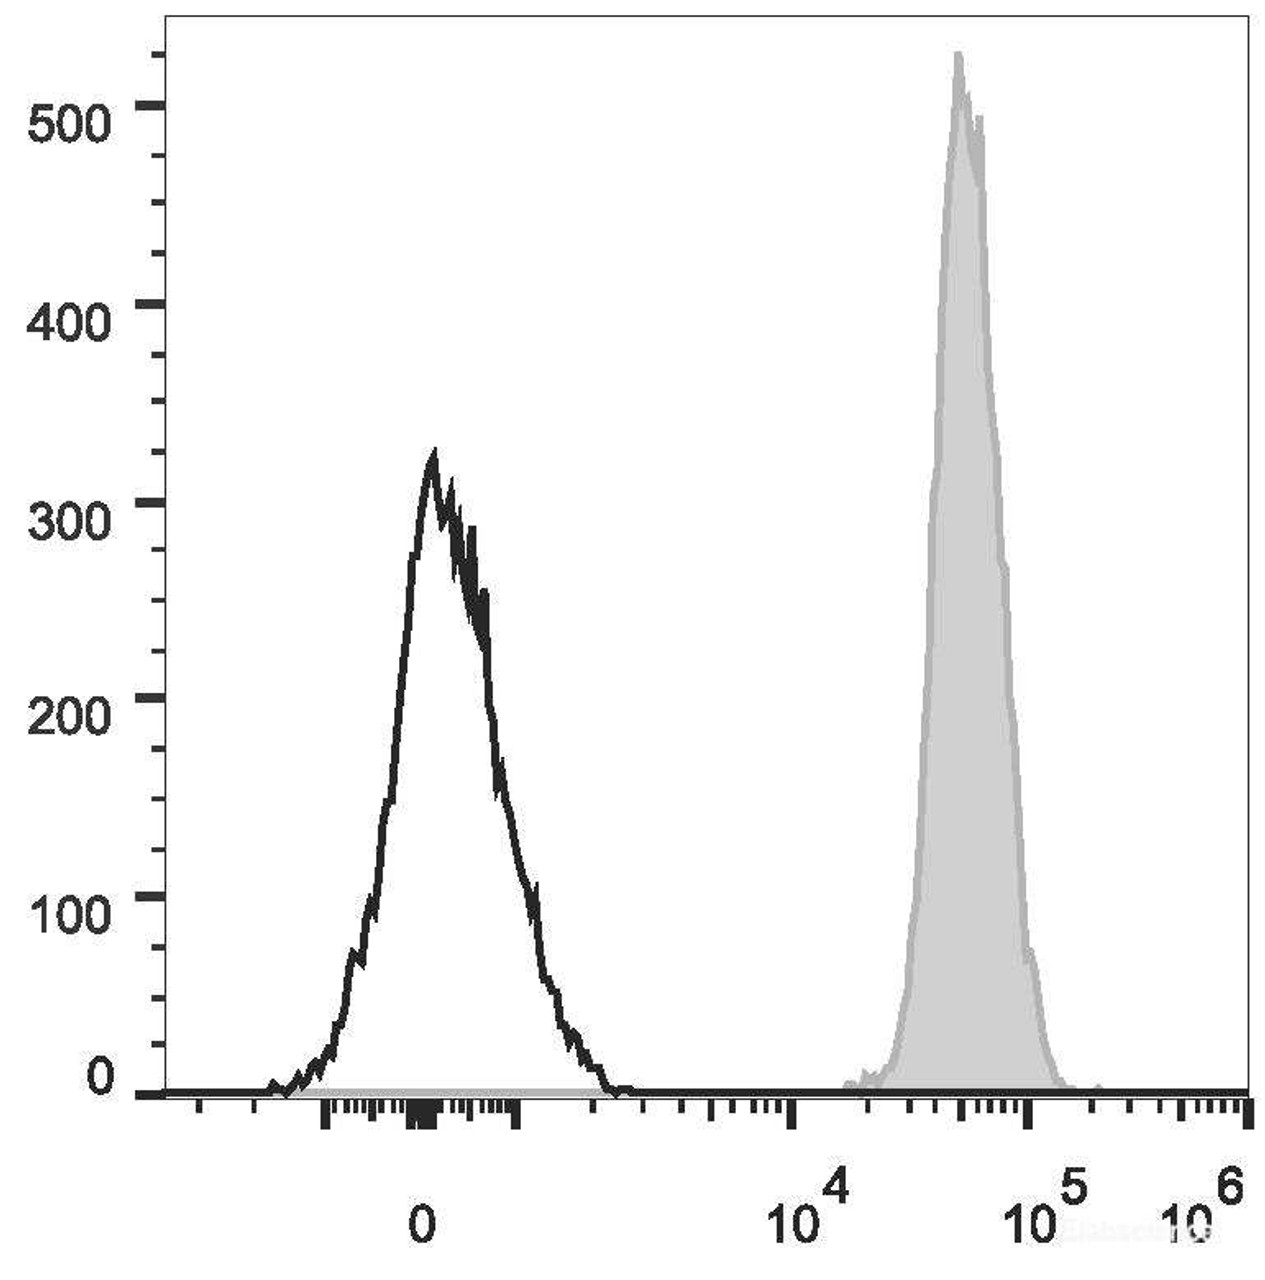 C57BL/6 murine splenocytes are stained with PE/Cyanine7 Anti-Mouse CD45 Antibody[Used at .2 μg/1<sup>6</sup> cells dilution](filled gray histogram). Unstained splenocytes (empty black histogram) are used as control.